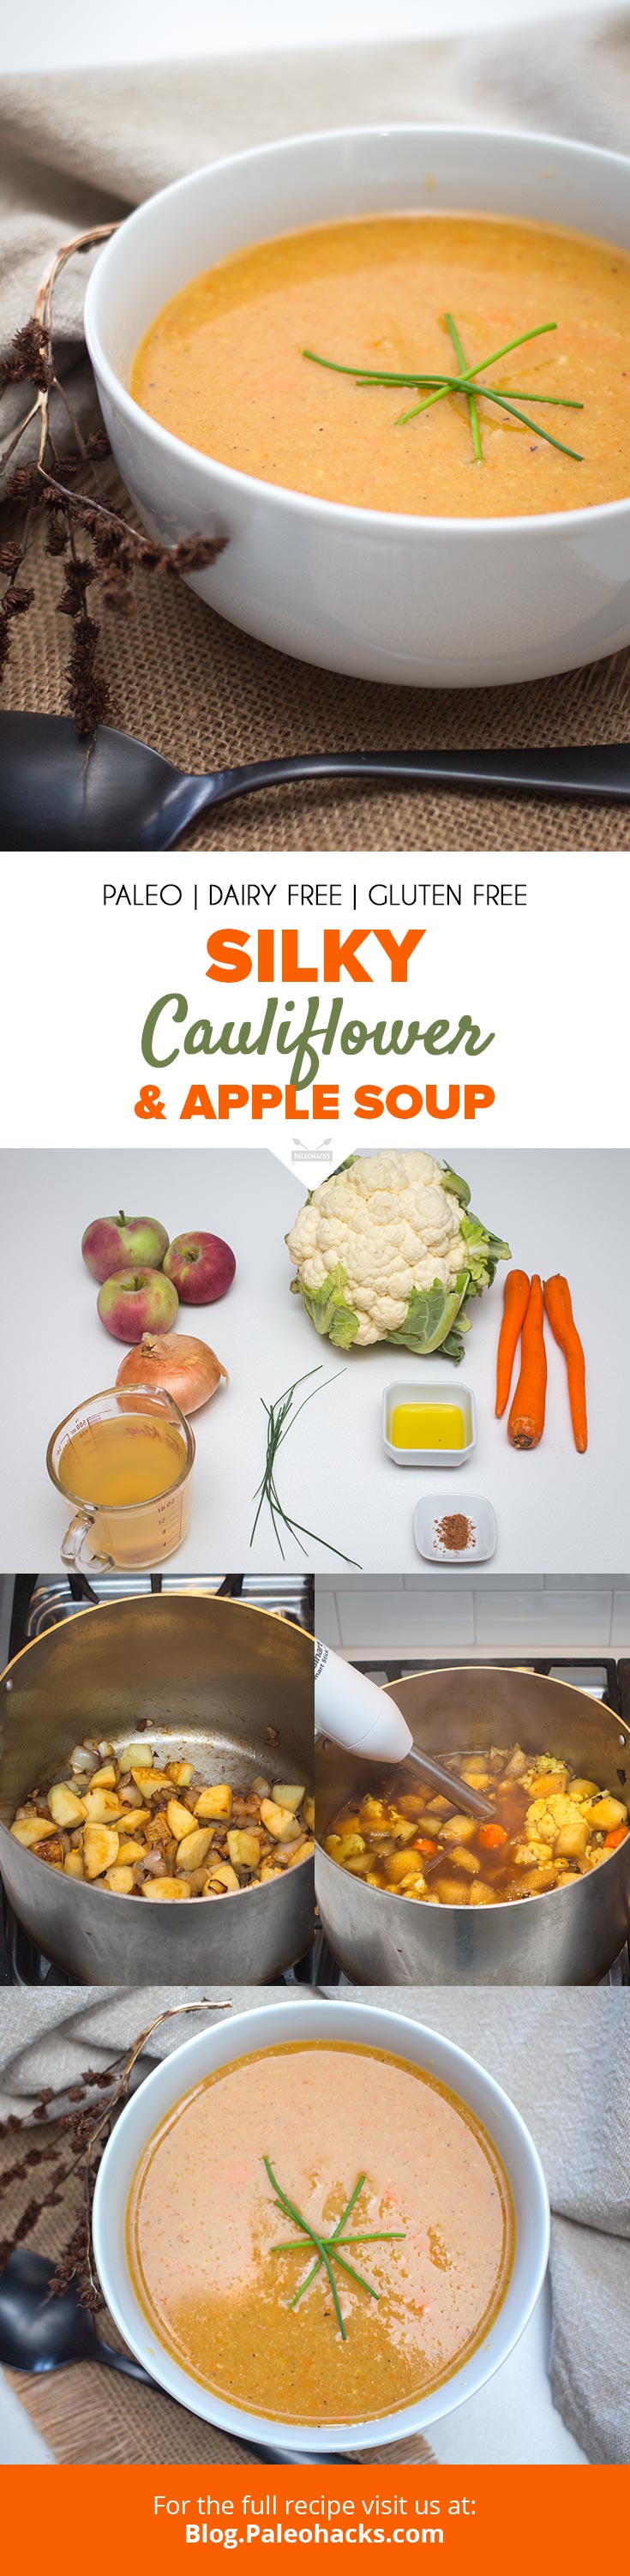 Warm up to this cozy soup made with fresh apples and cauliflower to boost up your immune system. Keeping your health in check is easier than you think!